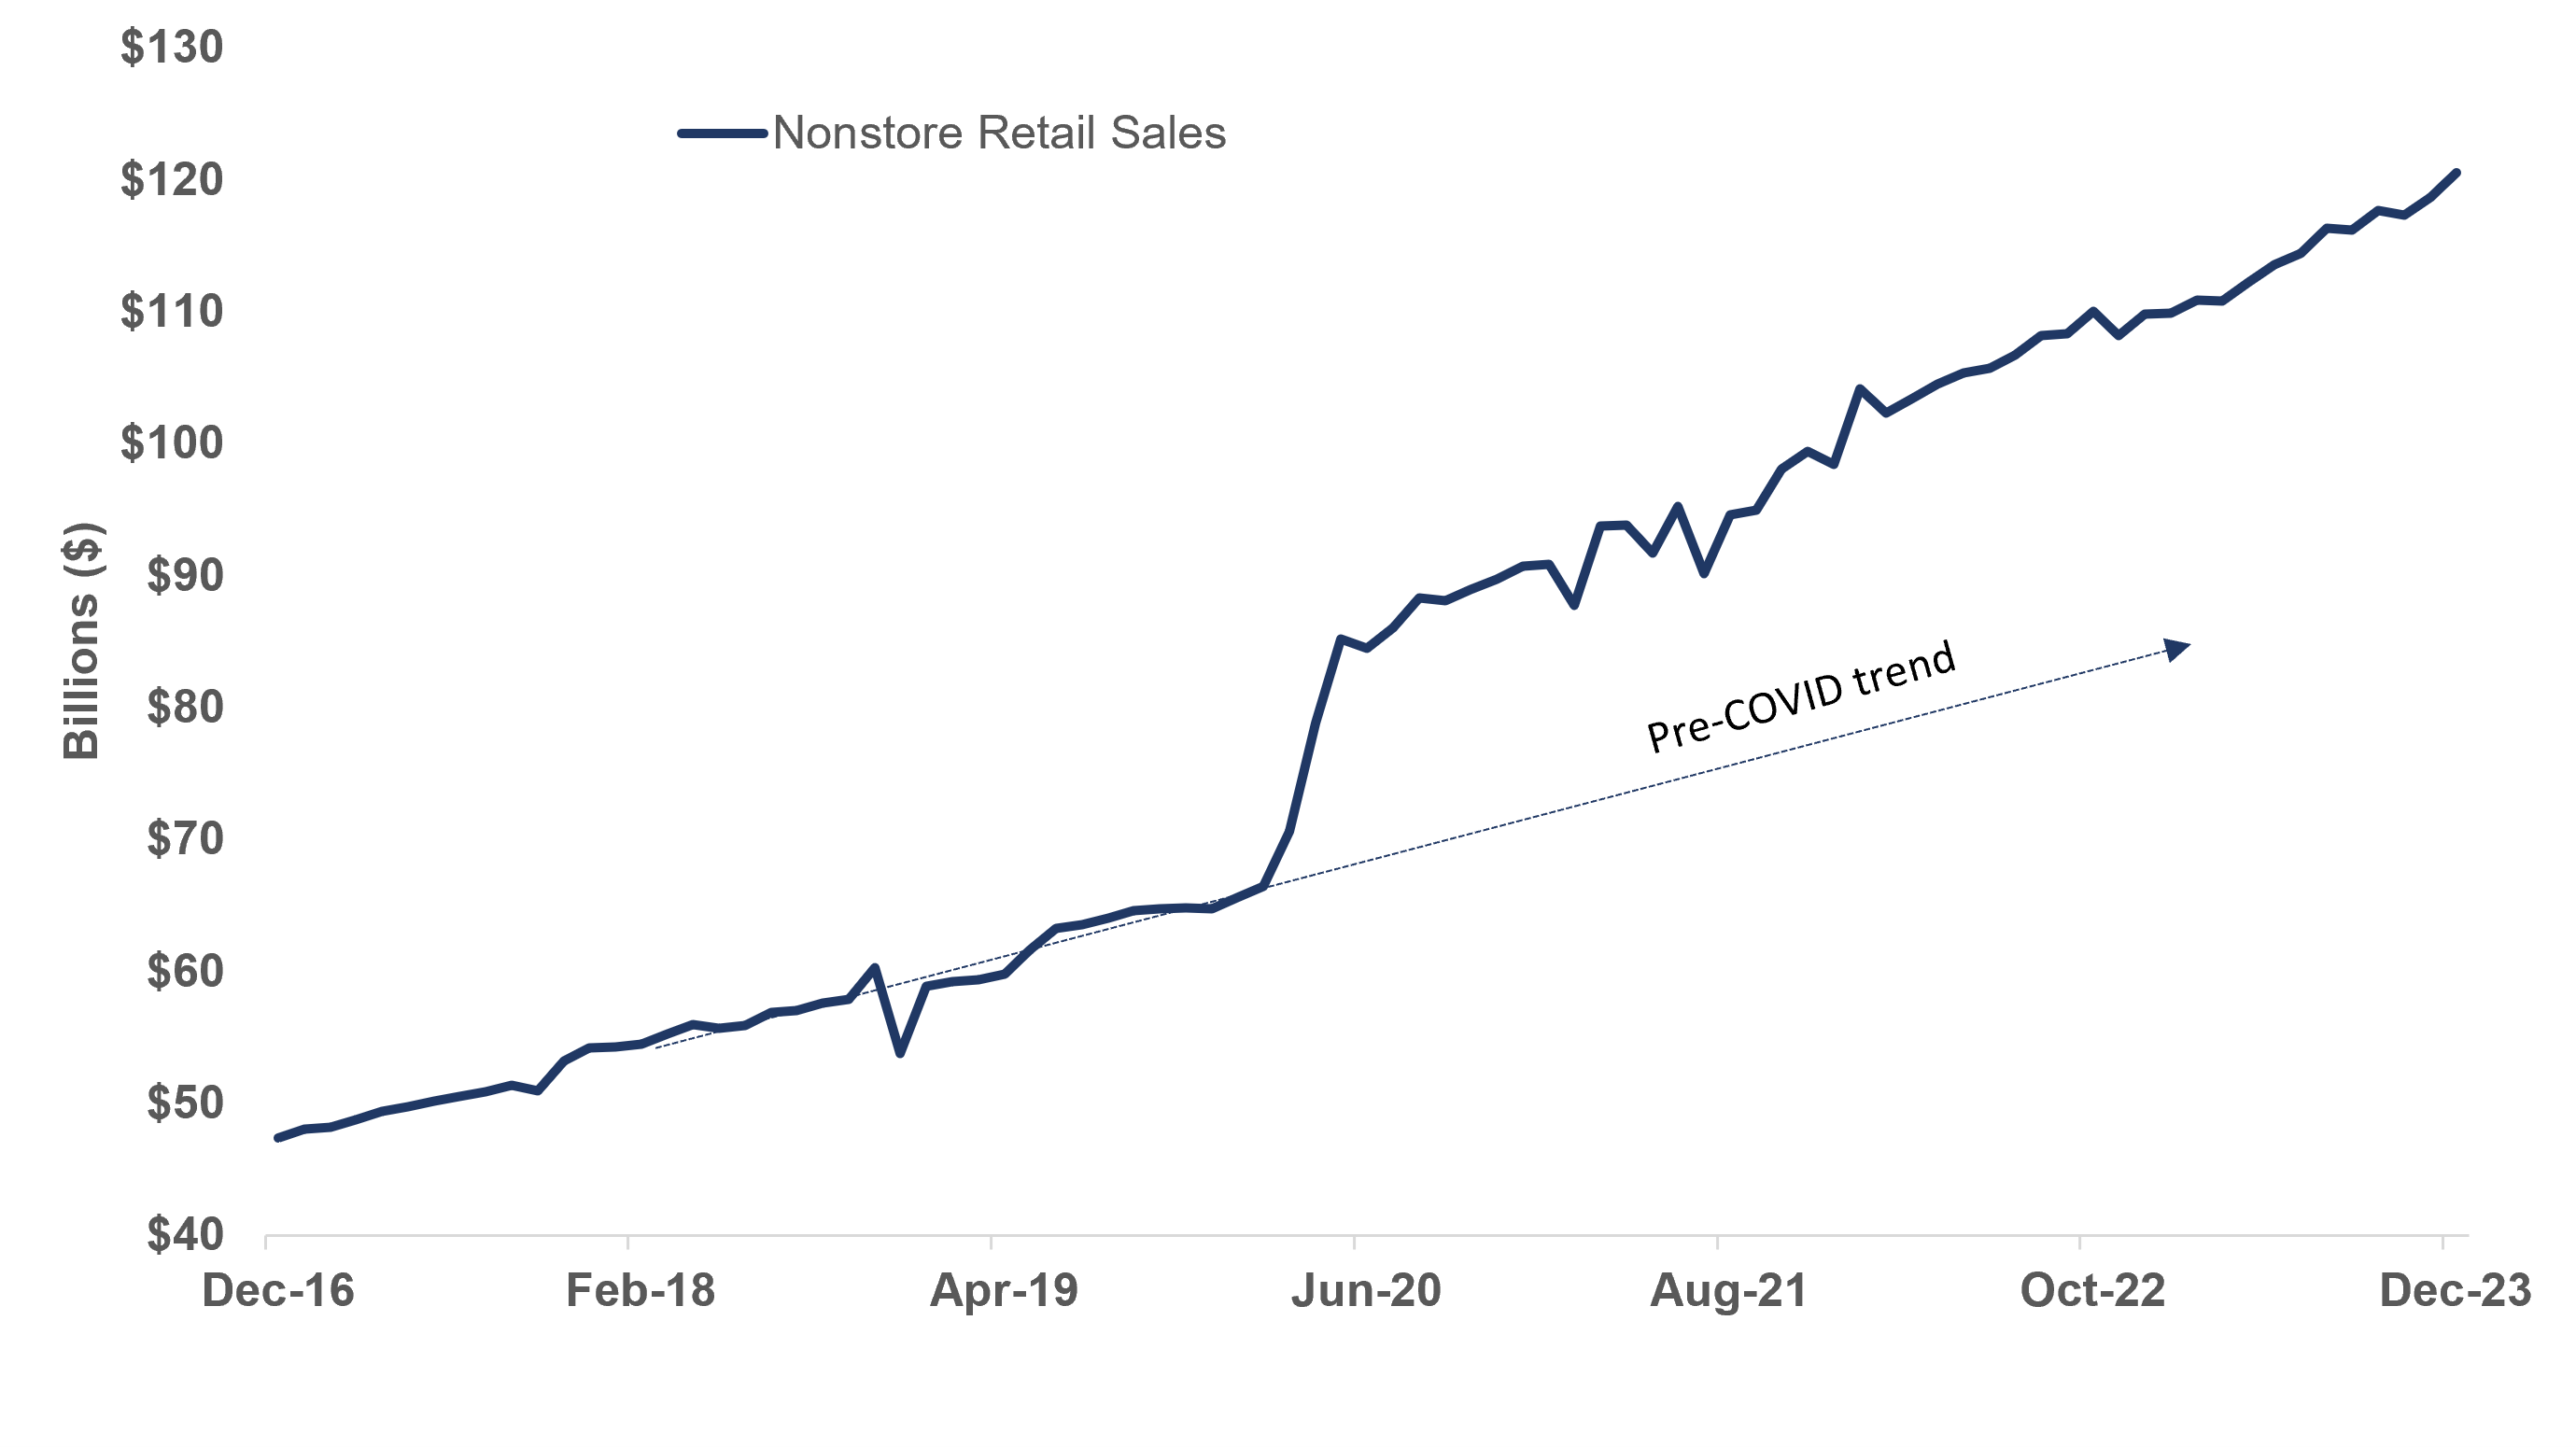 Line graph depicting online retail sales from December 2016 to December 2023 in billions, as described in the preceding paragraph.